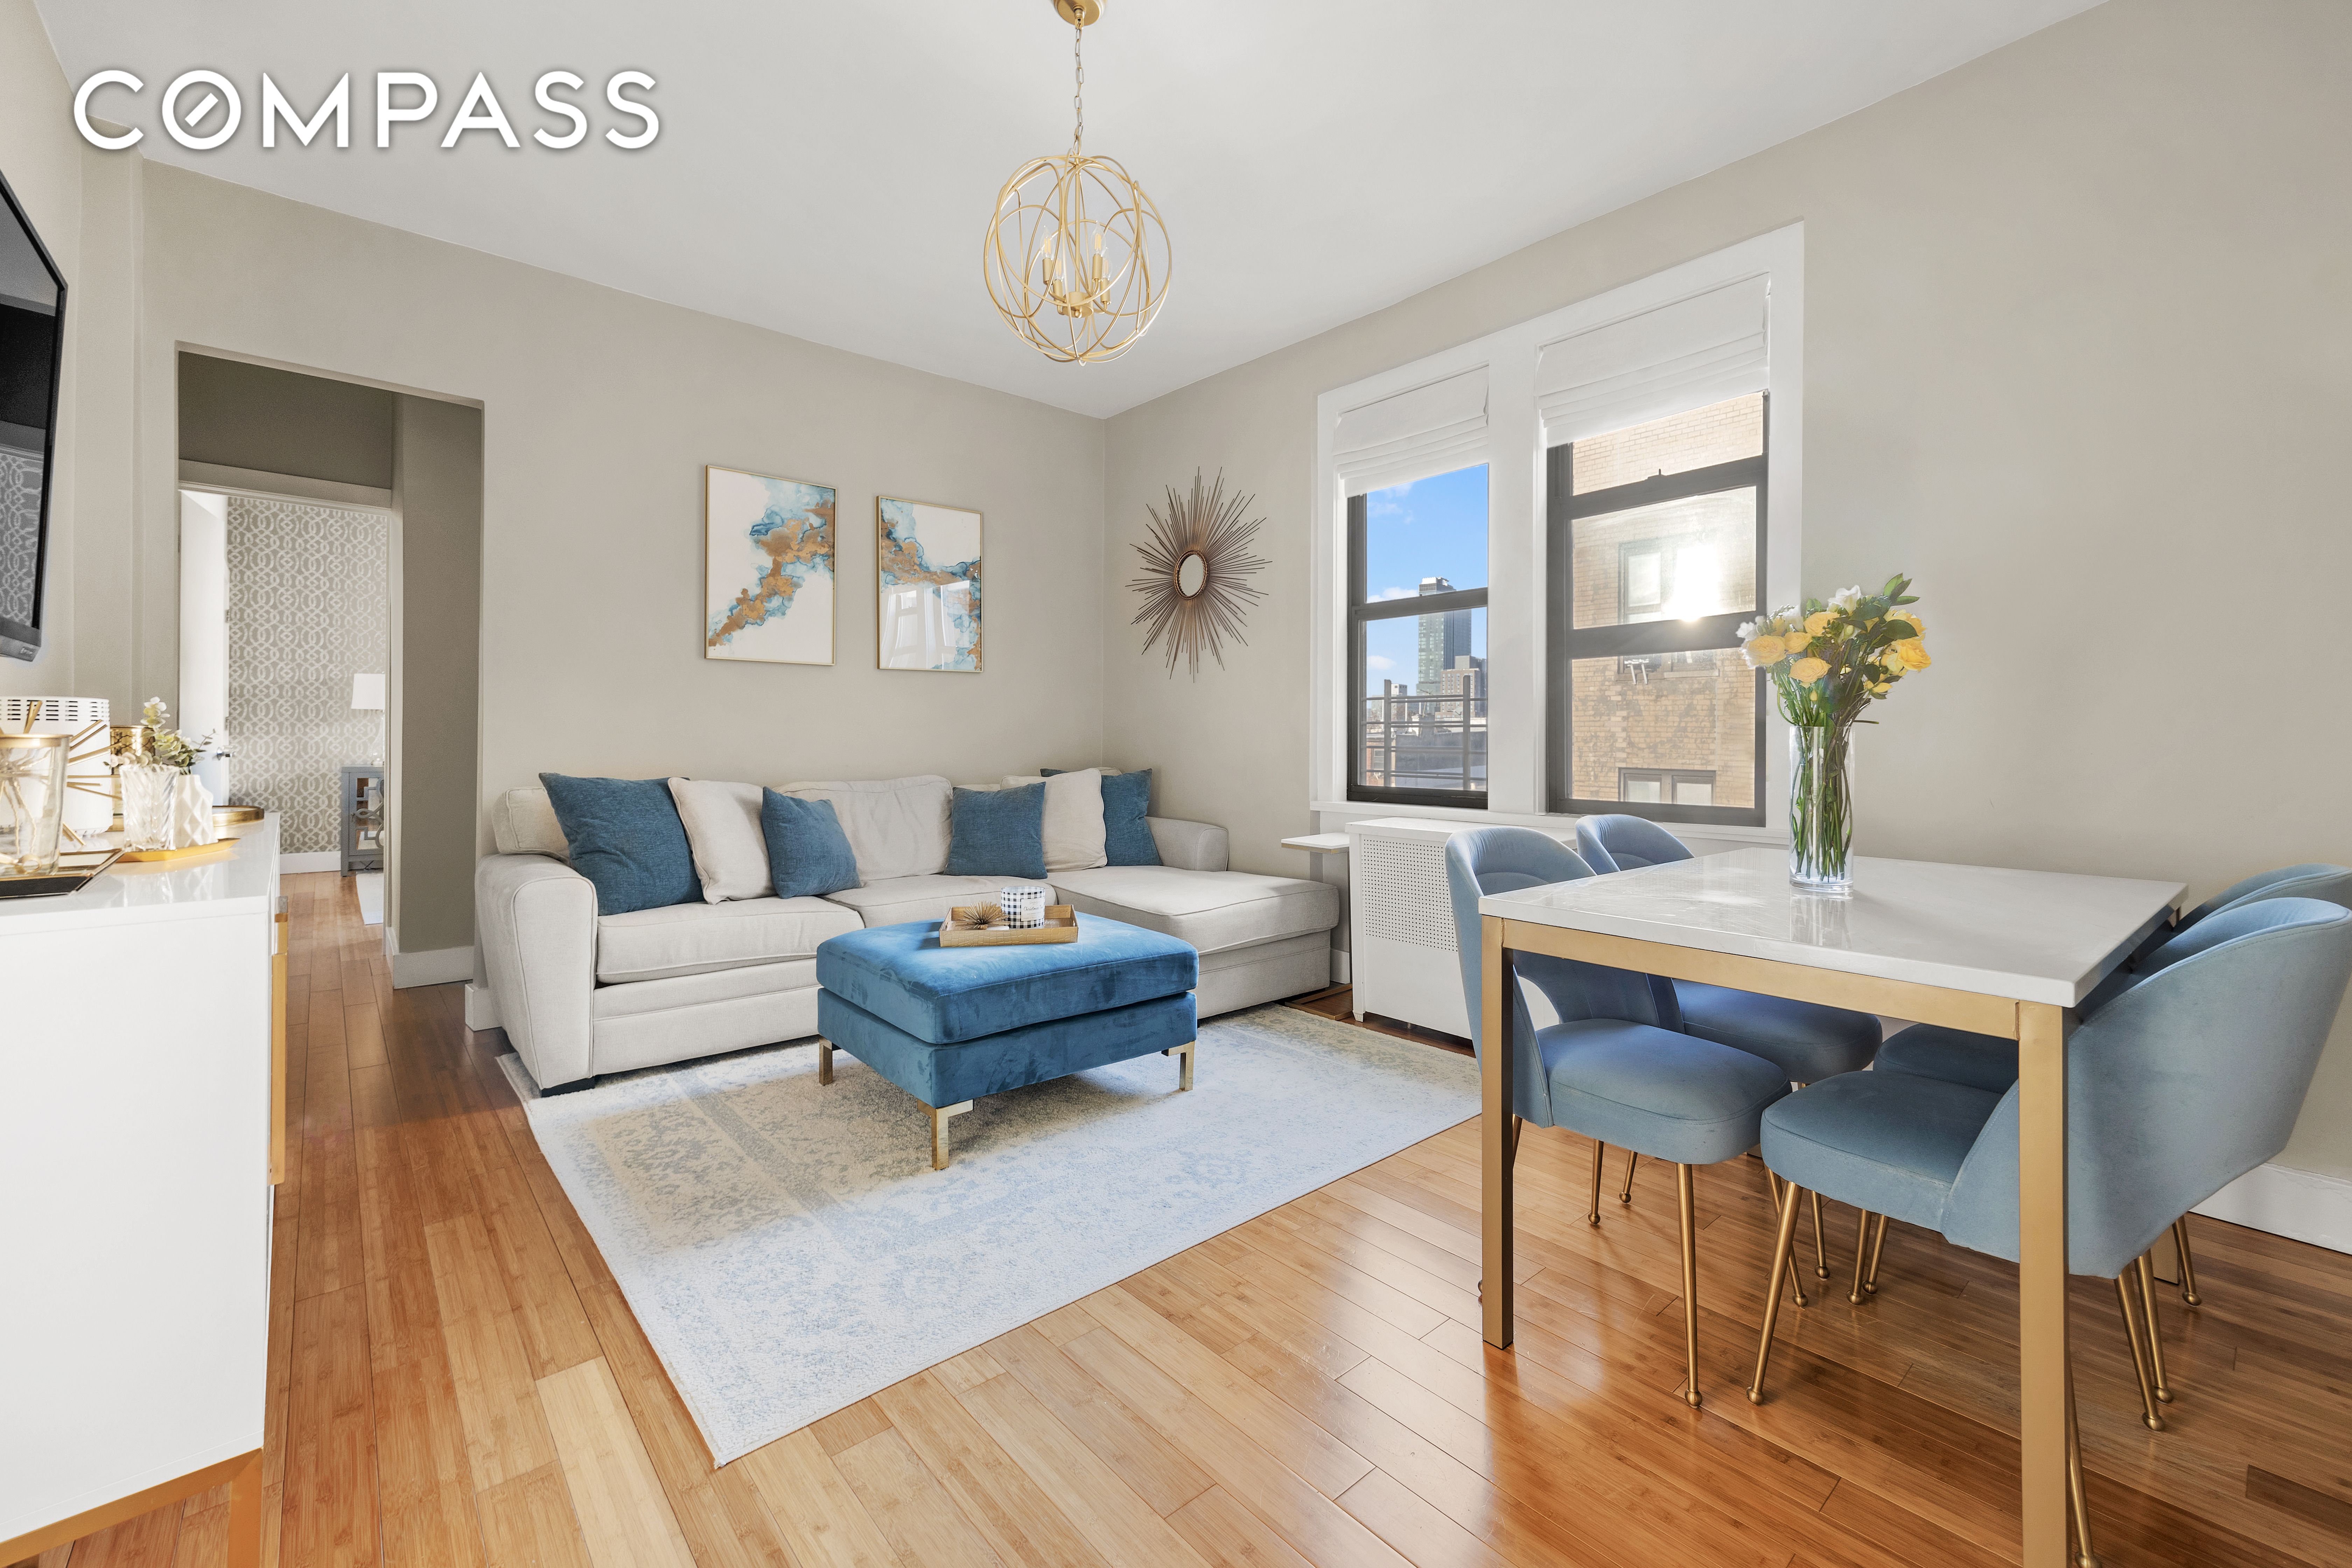 225 Lincoln Place 5A, Park Slope, Brooklyn, New York - 2 Bedrooms  
1 Bathrooms  
4 Rooms - 